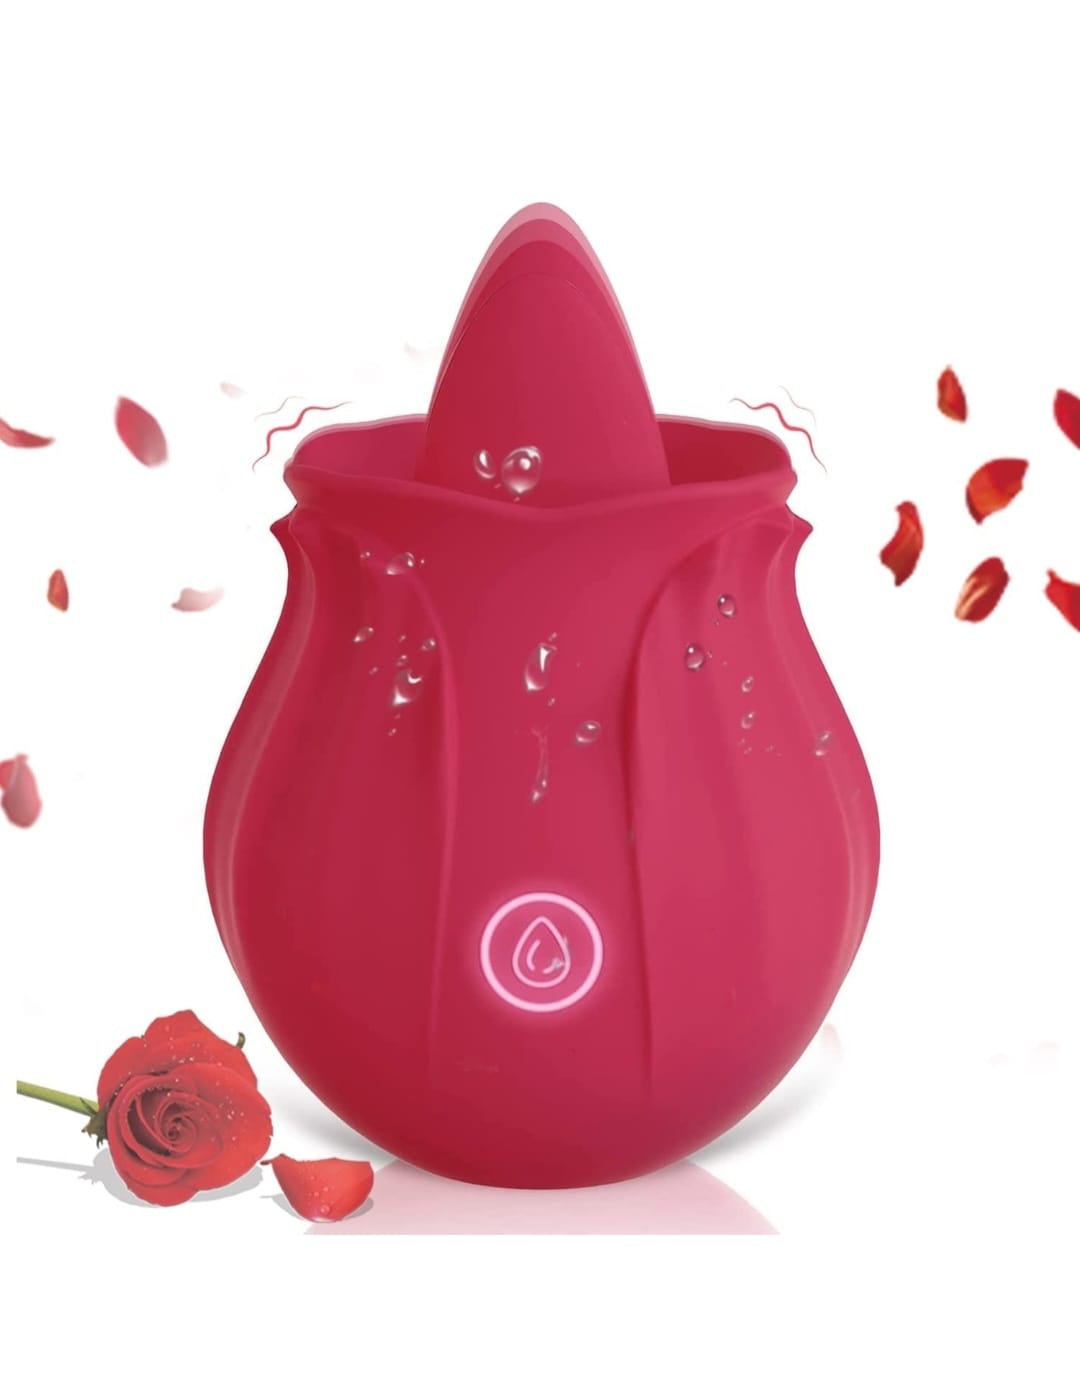 Generation 1 Rose Vibrator Sexy Toys for Women Adult Sex Rose